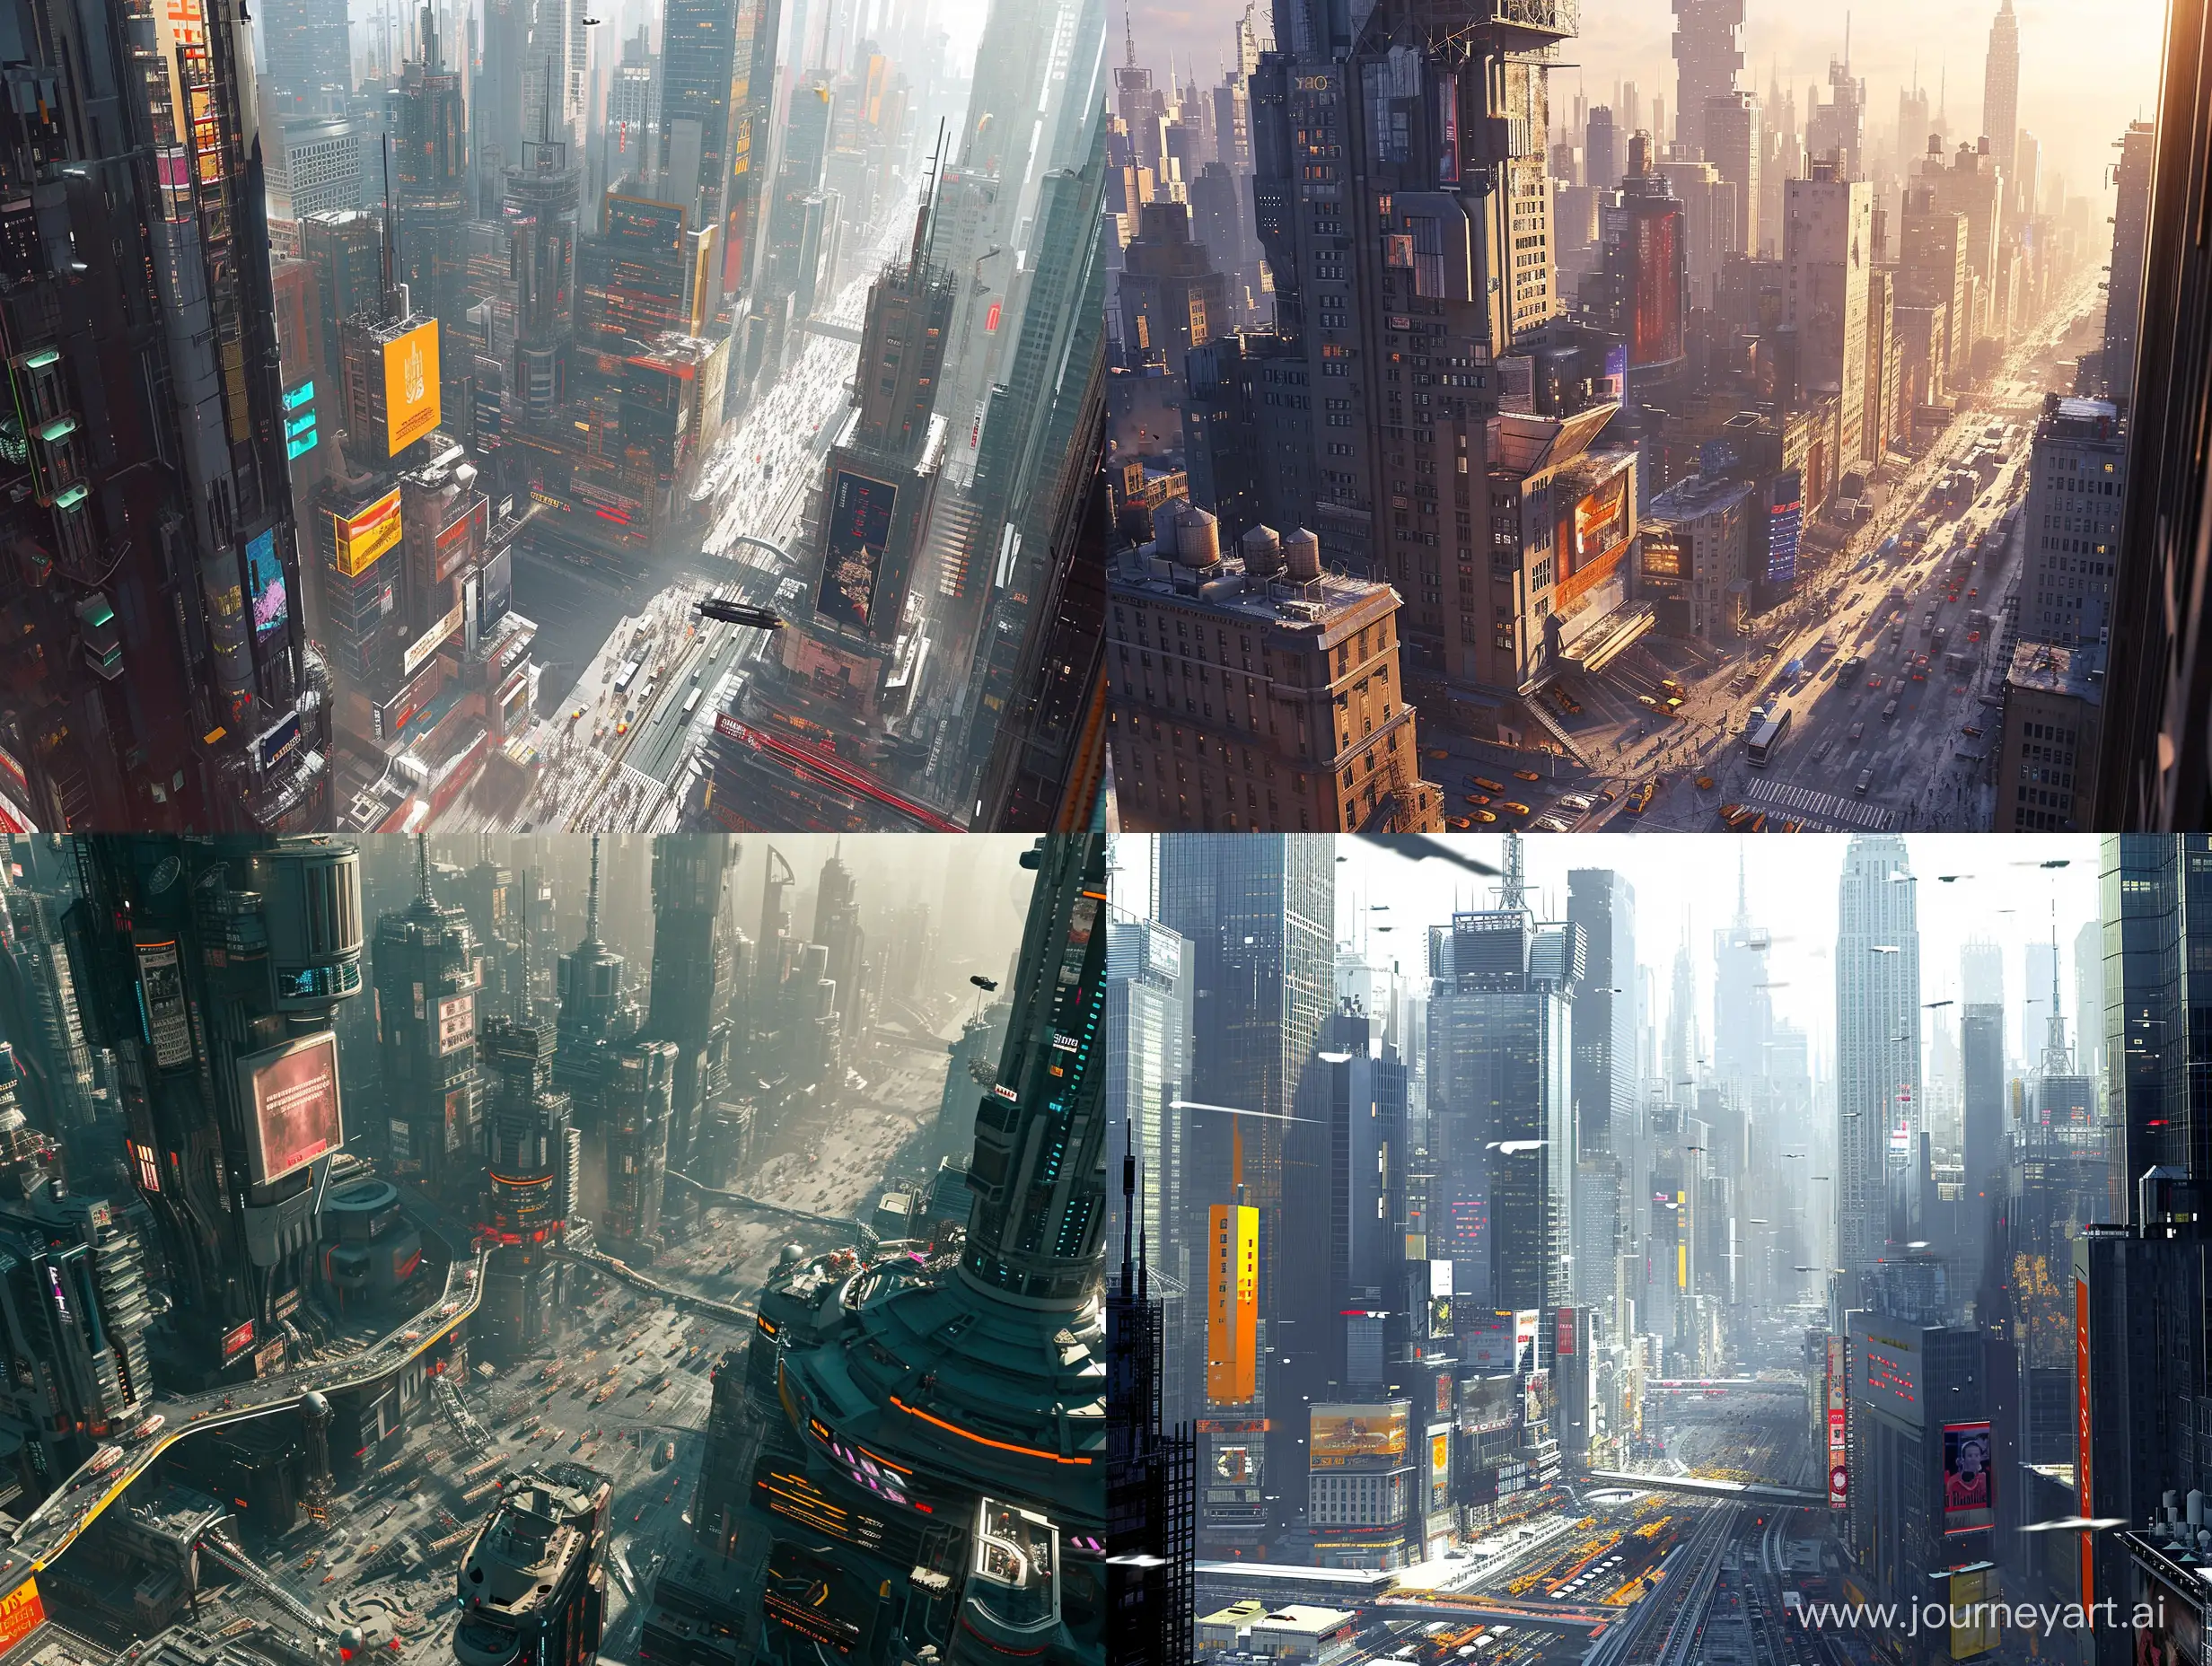 a Futuristic city scene, the detail on the image is insanely perfect, sci fi, modern, busy environment, naturalism, vibrant, transportation, cinematic, soft visuals to match the mood, modern architectures, dystopian, skyscrapers and buildings, residences, new york city, science fiction, movie still
